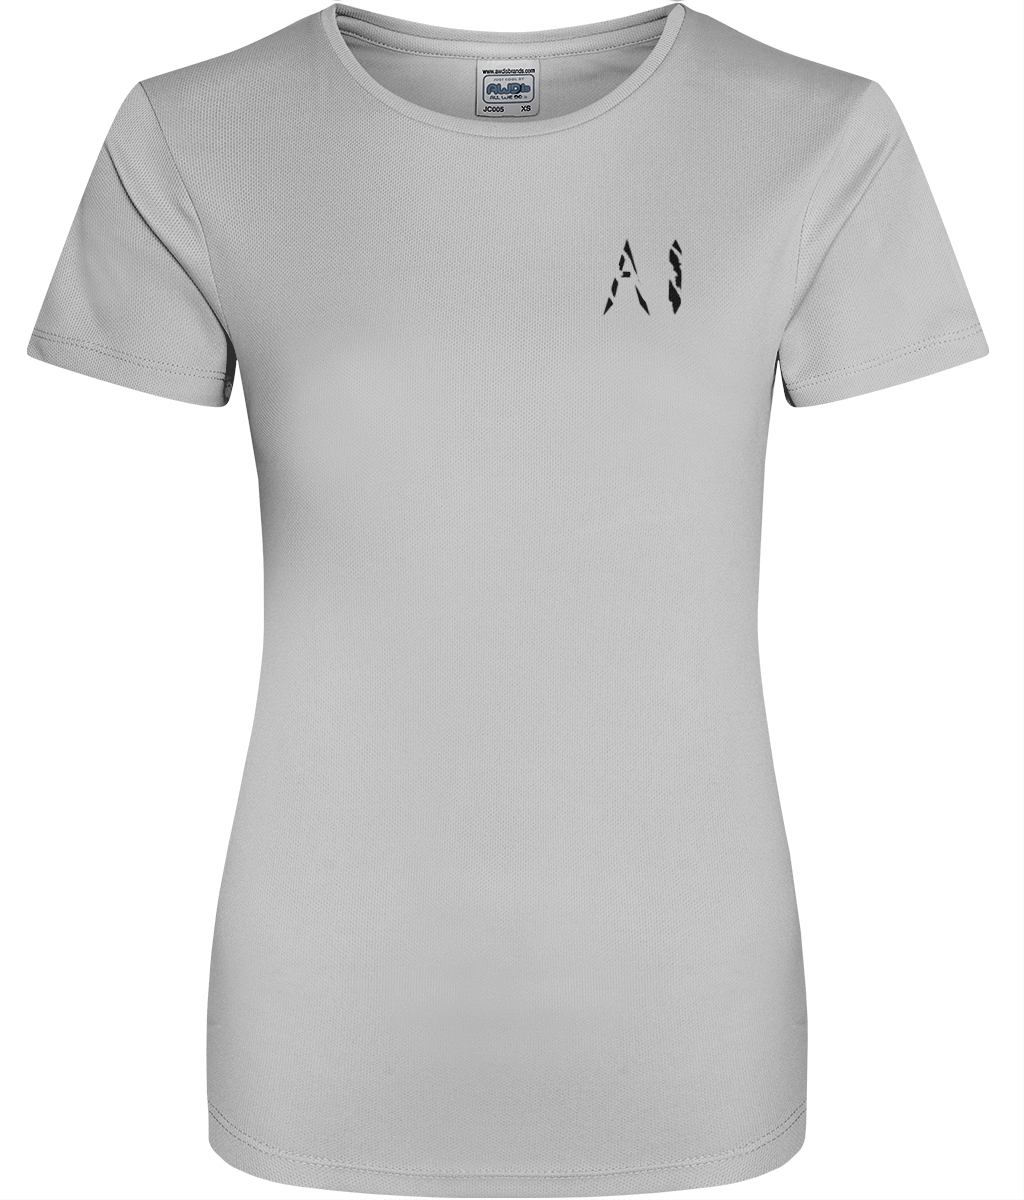 Womens light grey Athletic Sports Shirt with black AI logo on left breast